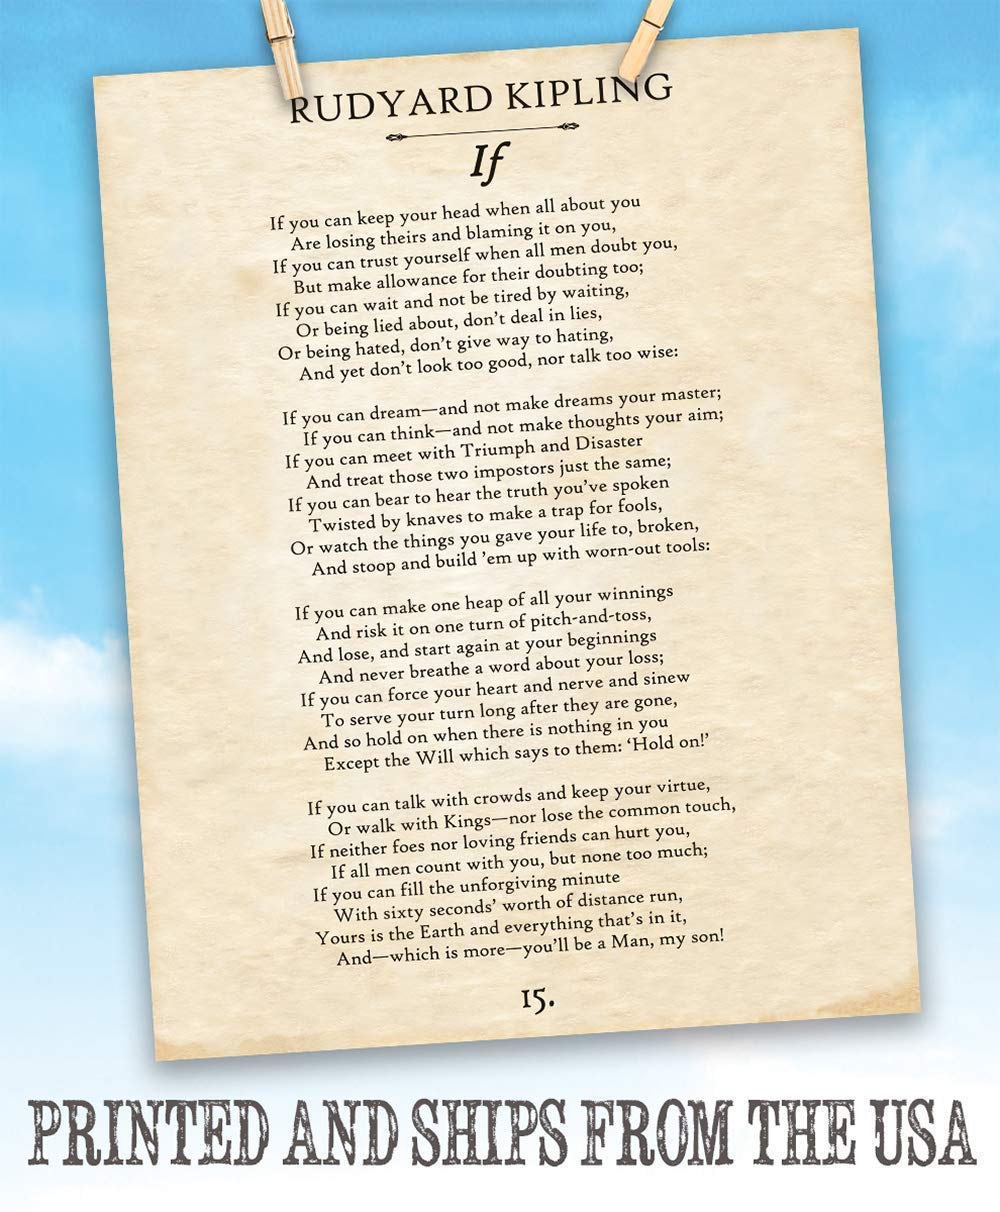 Rudyard Kipling - If - Inspirational Sayings Wall Decor, Motivational Poem Poster, Canvas Wall Art for Home and Office, Inspiring Literature Gift, Choose Unframed Book Poster Poster or Canvas Arts